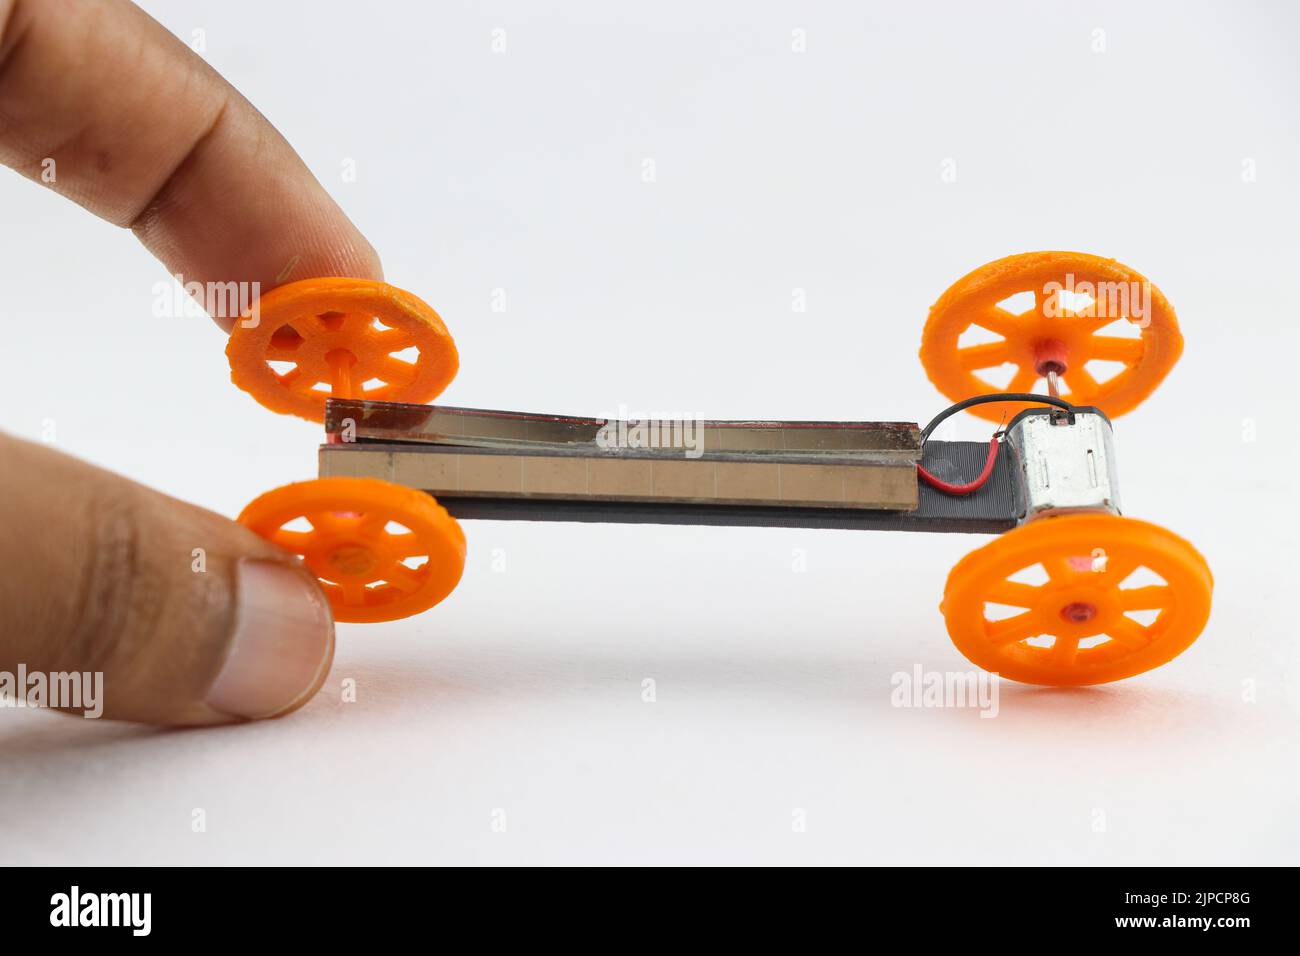 Mini solar car held in hand with wheels made from 3d printing technology. Future of 3d print technology shown with useful objects Stock Photo